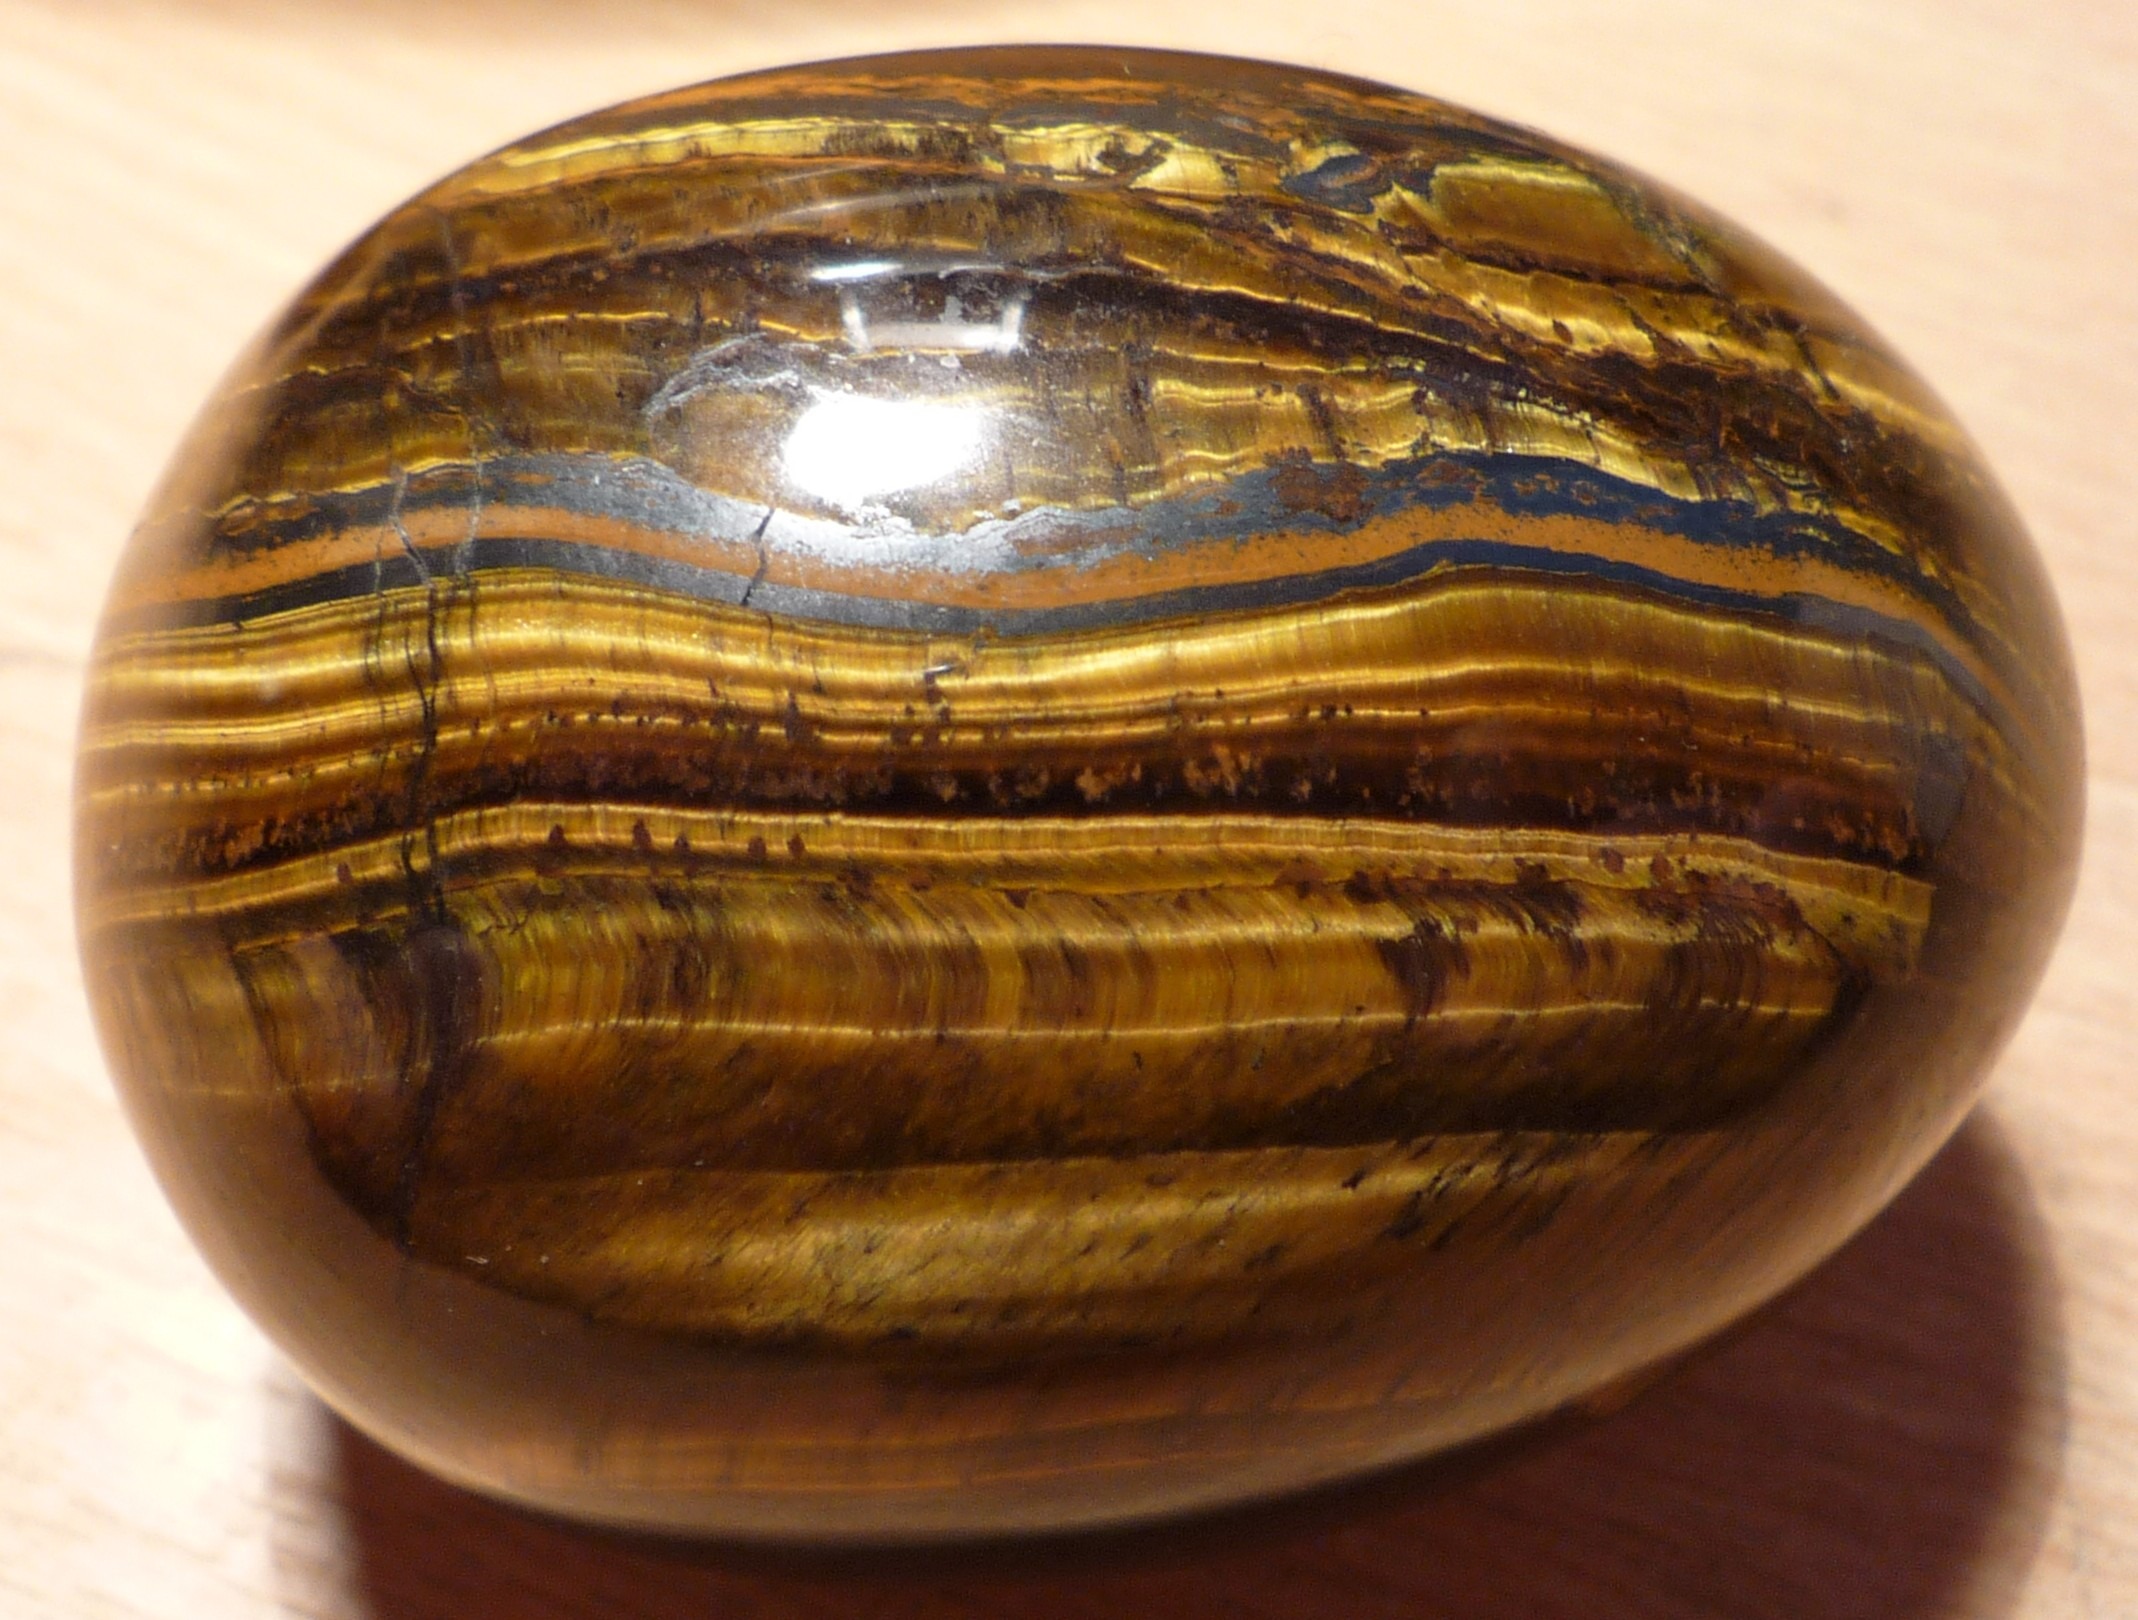 Oval shape tiger’s eye with iron stripes